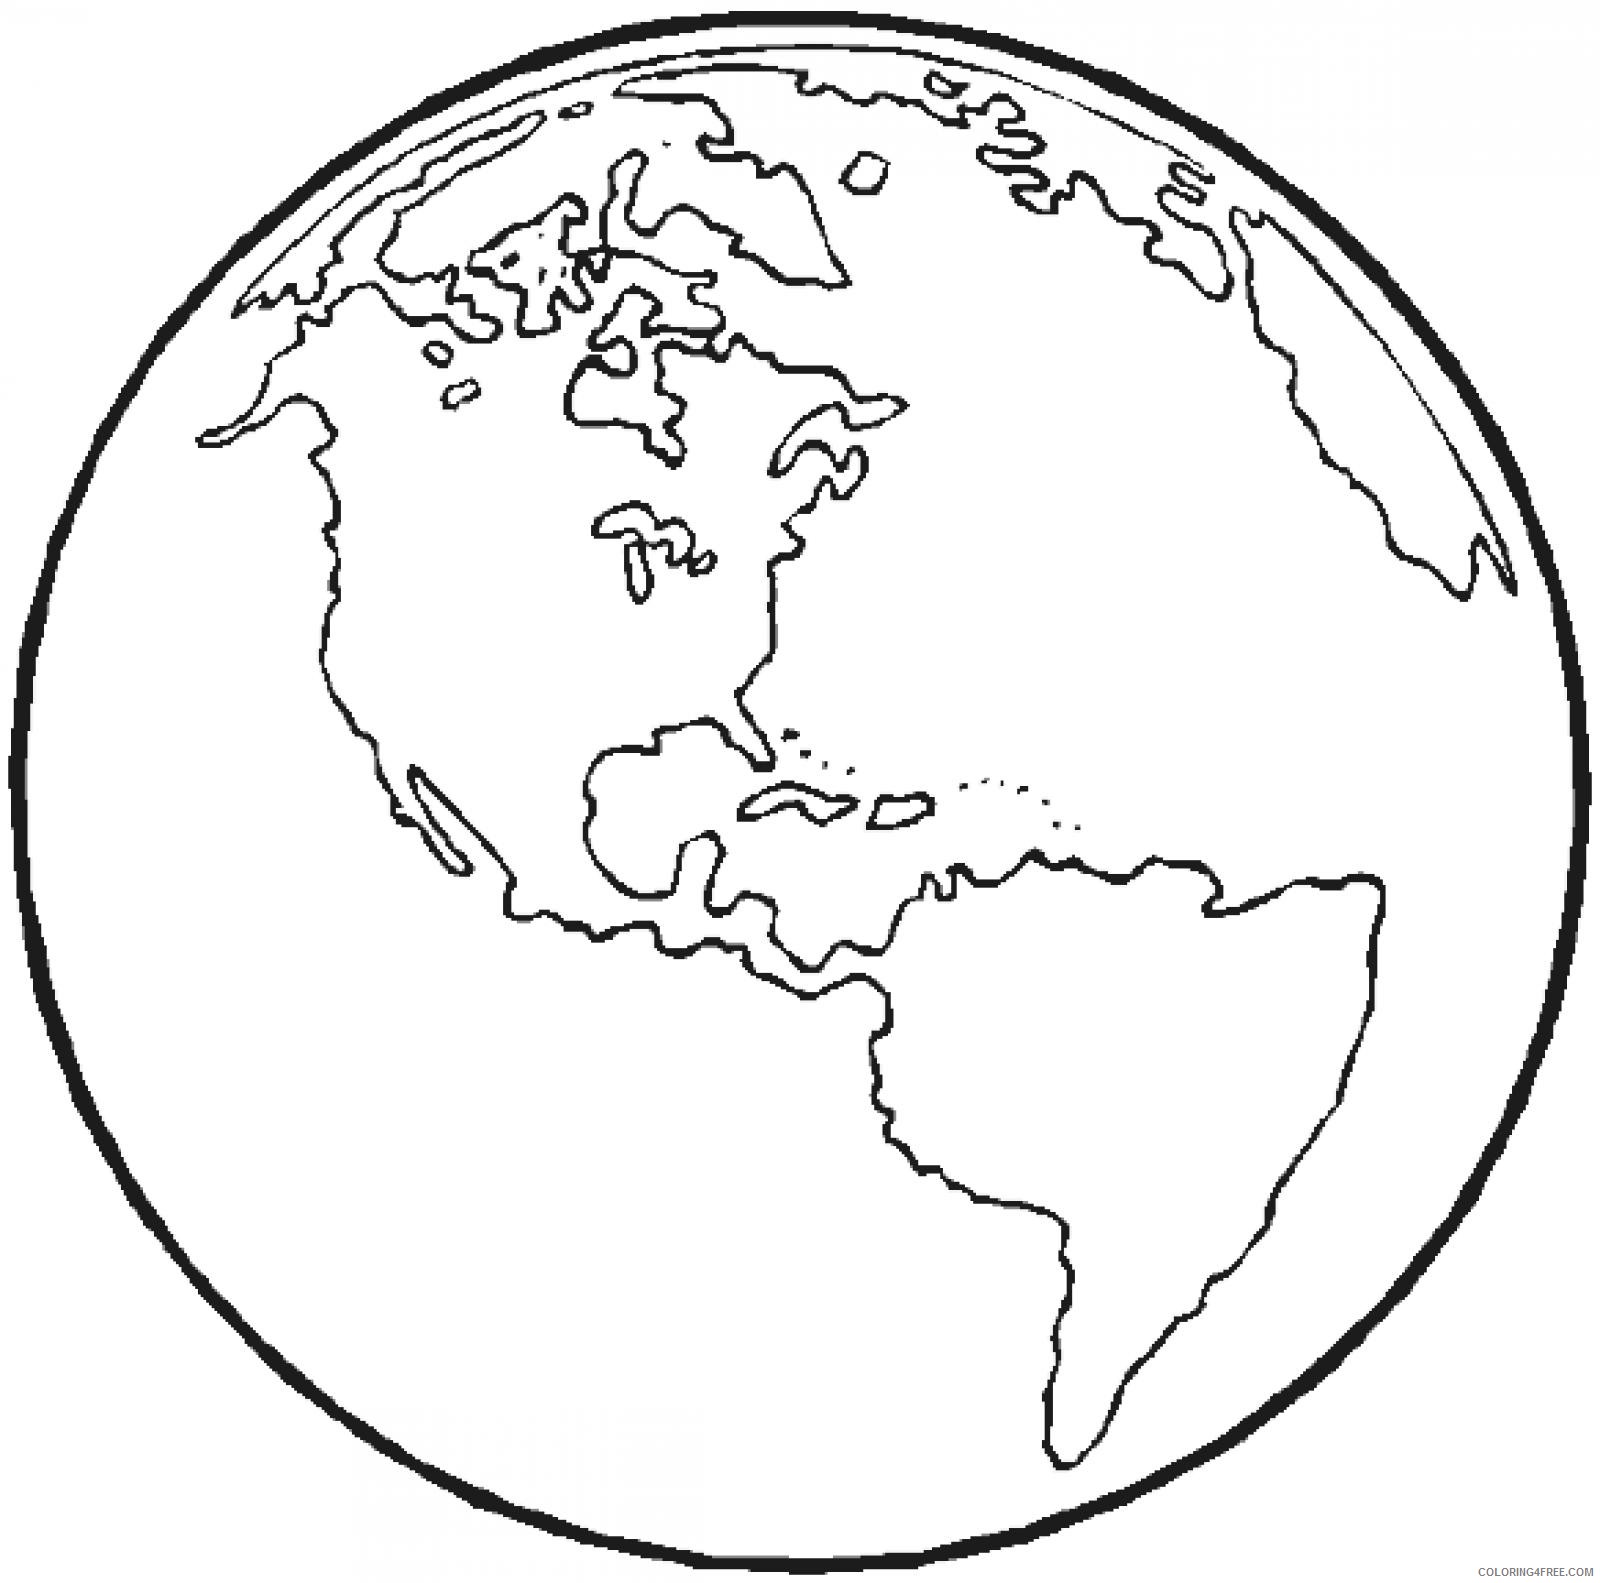 earth coloring pages to print Coloring4free